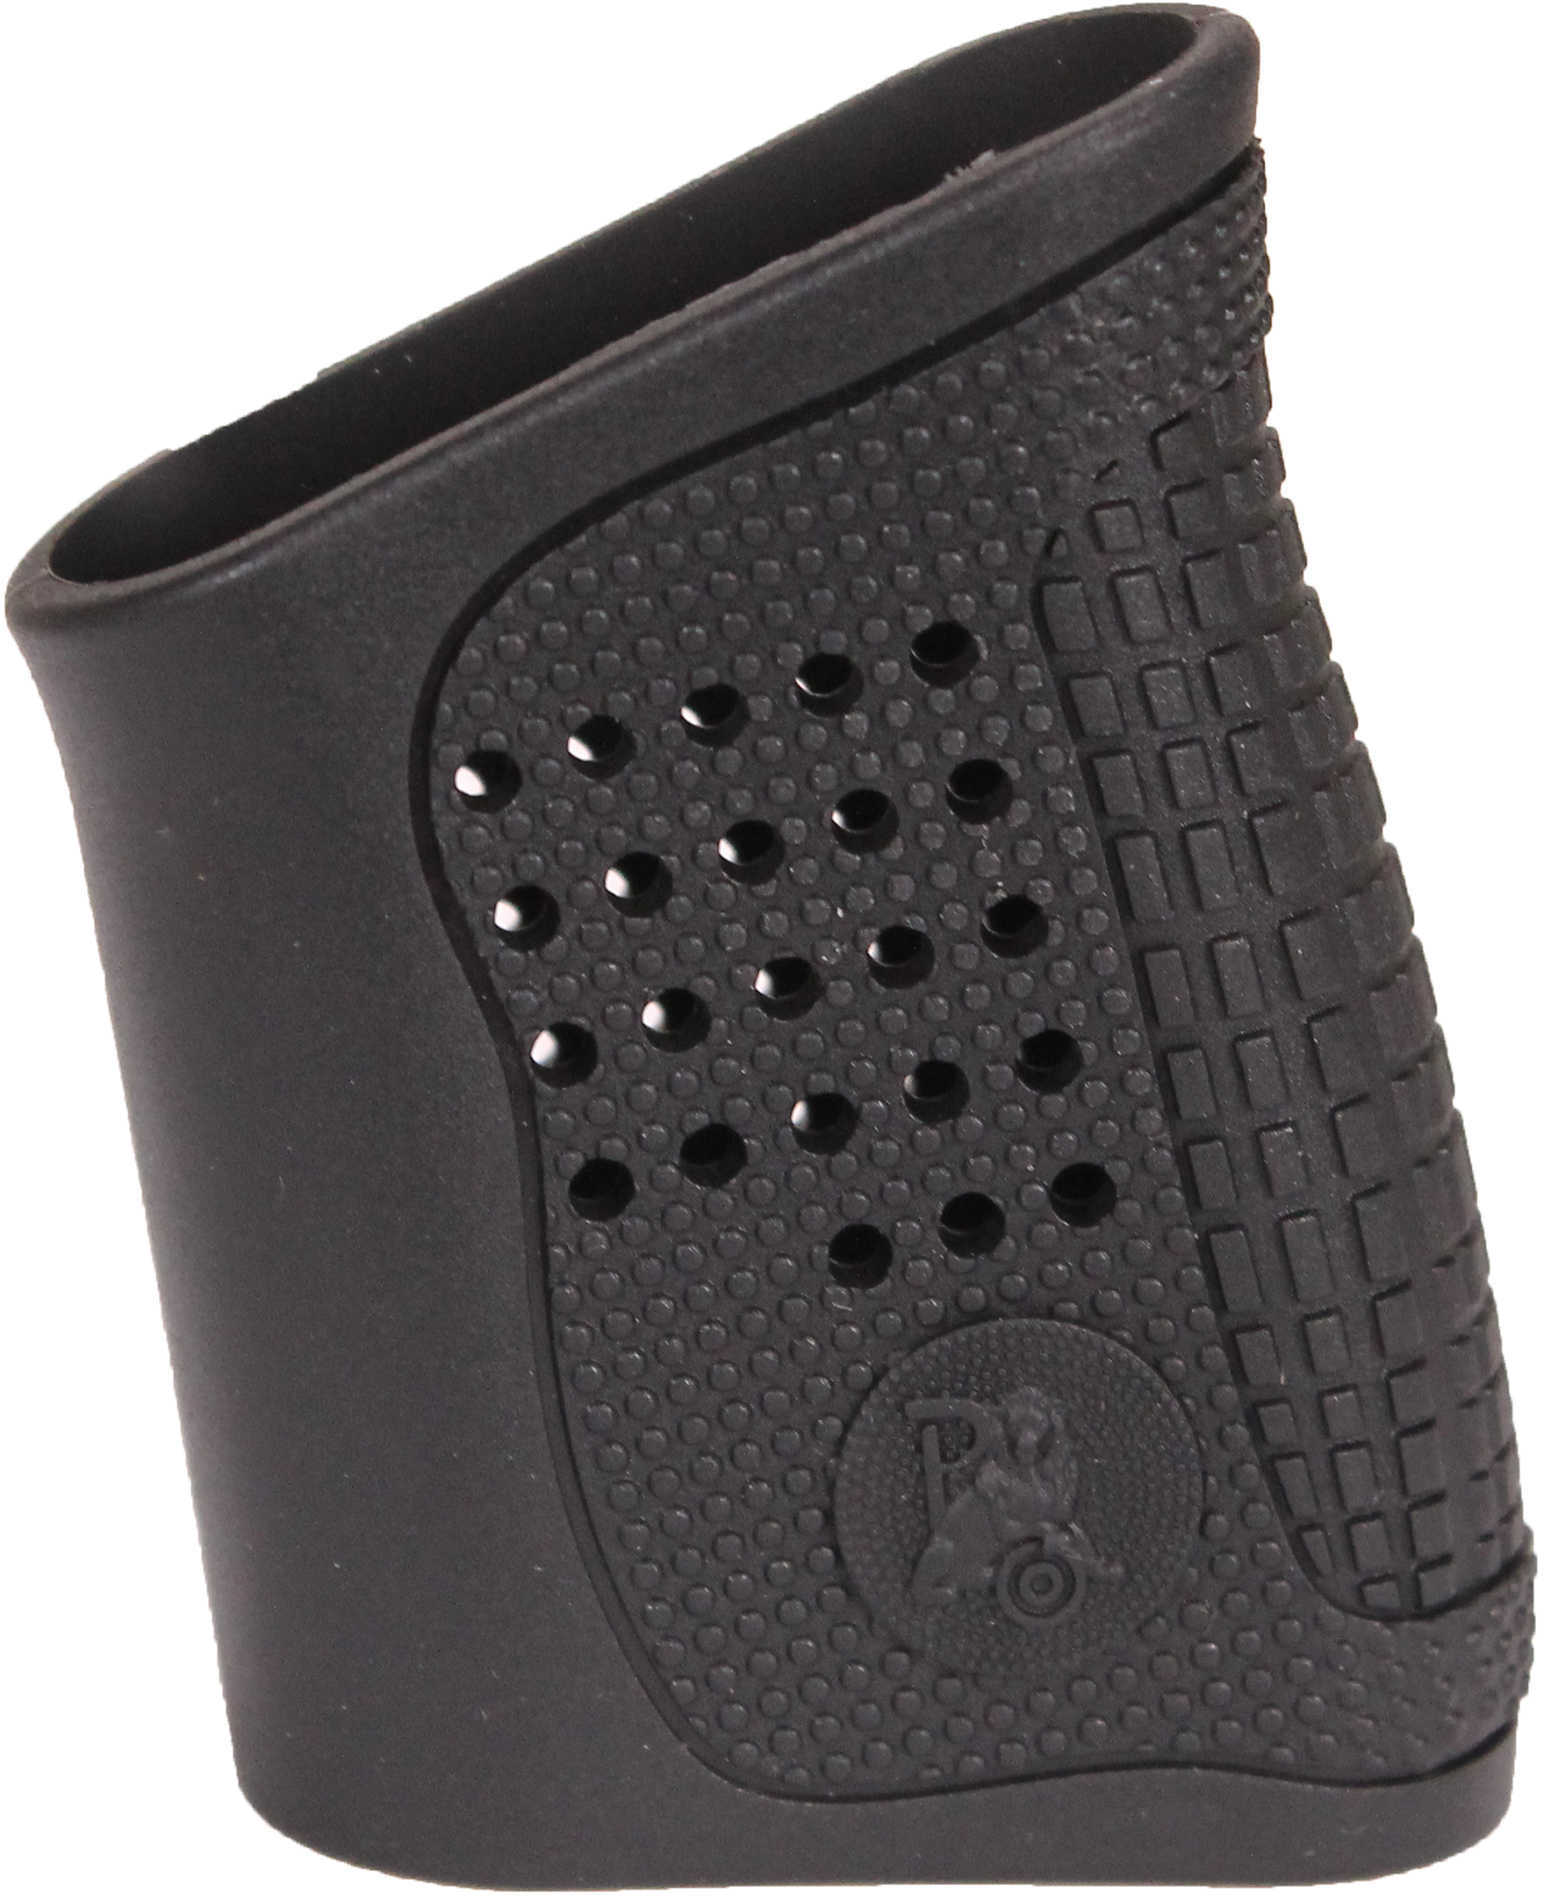 Pachmayr 05167 Tactical Grip Glove Semi Auto Sig P320 Rubber Black